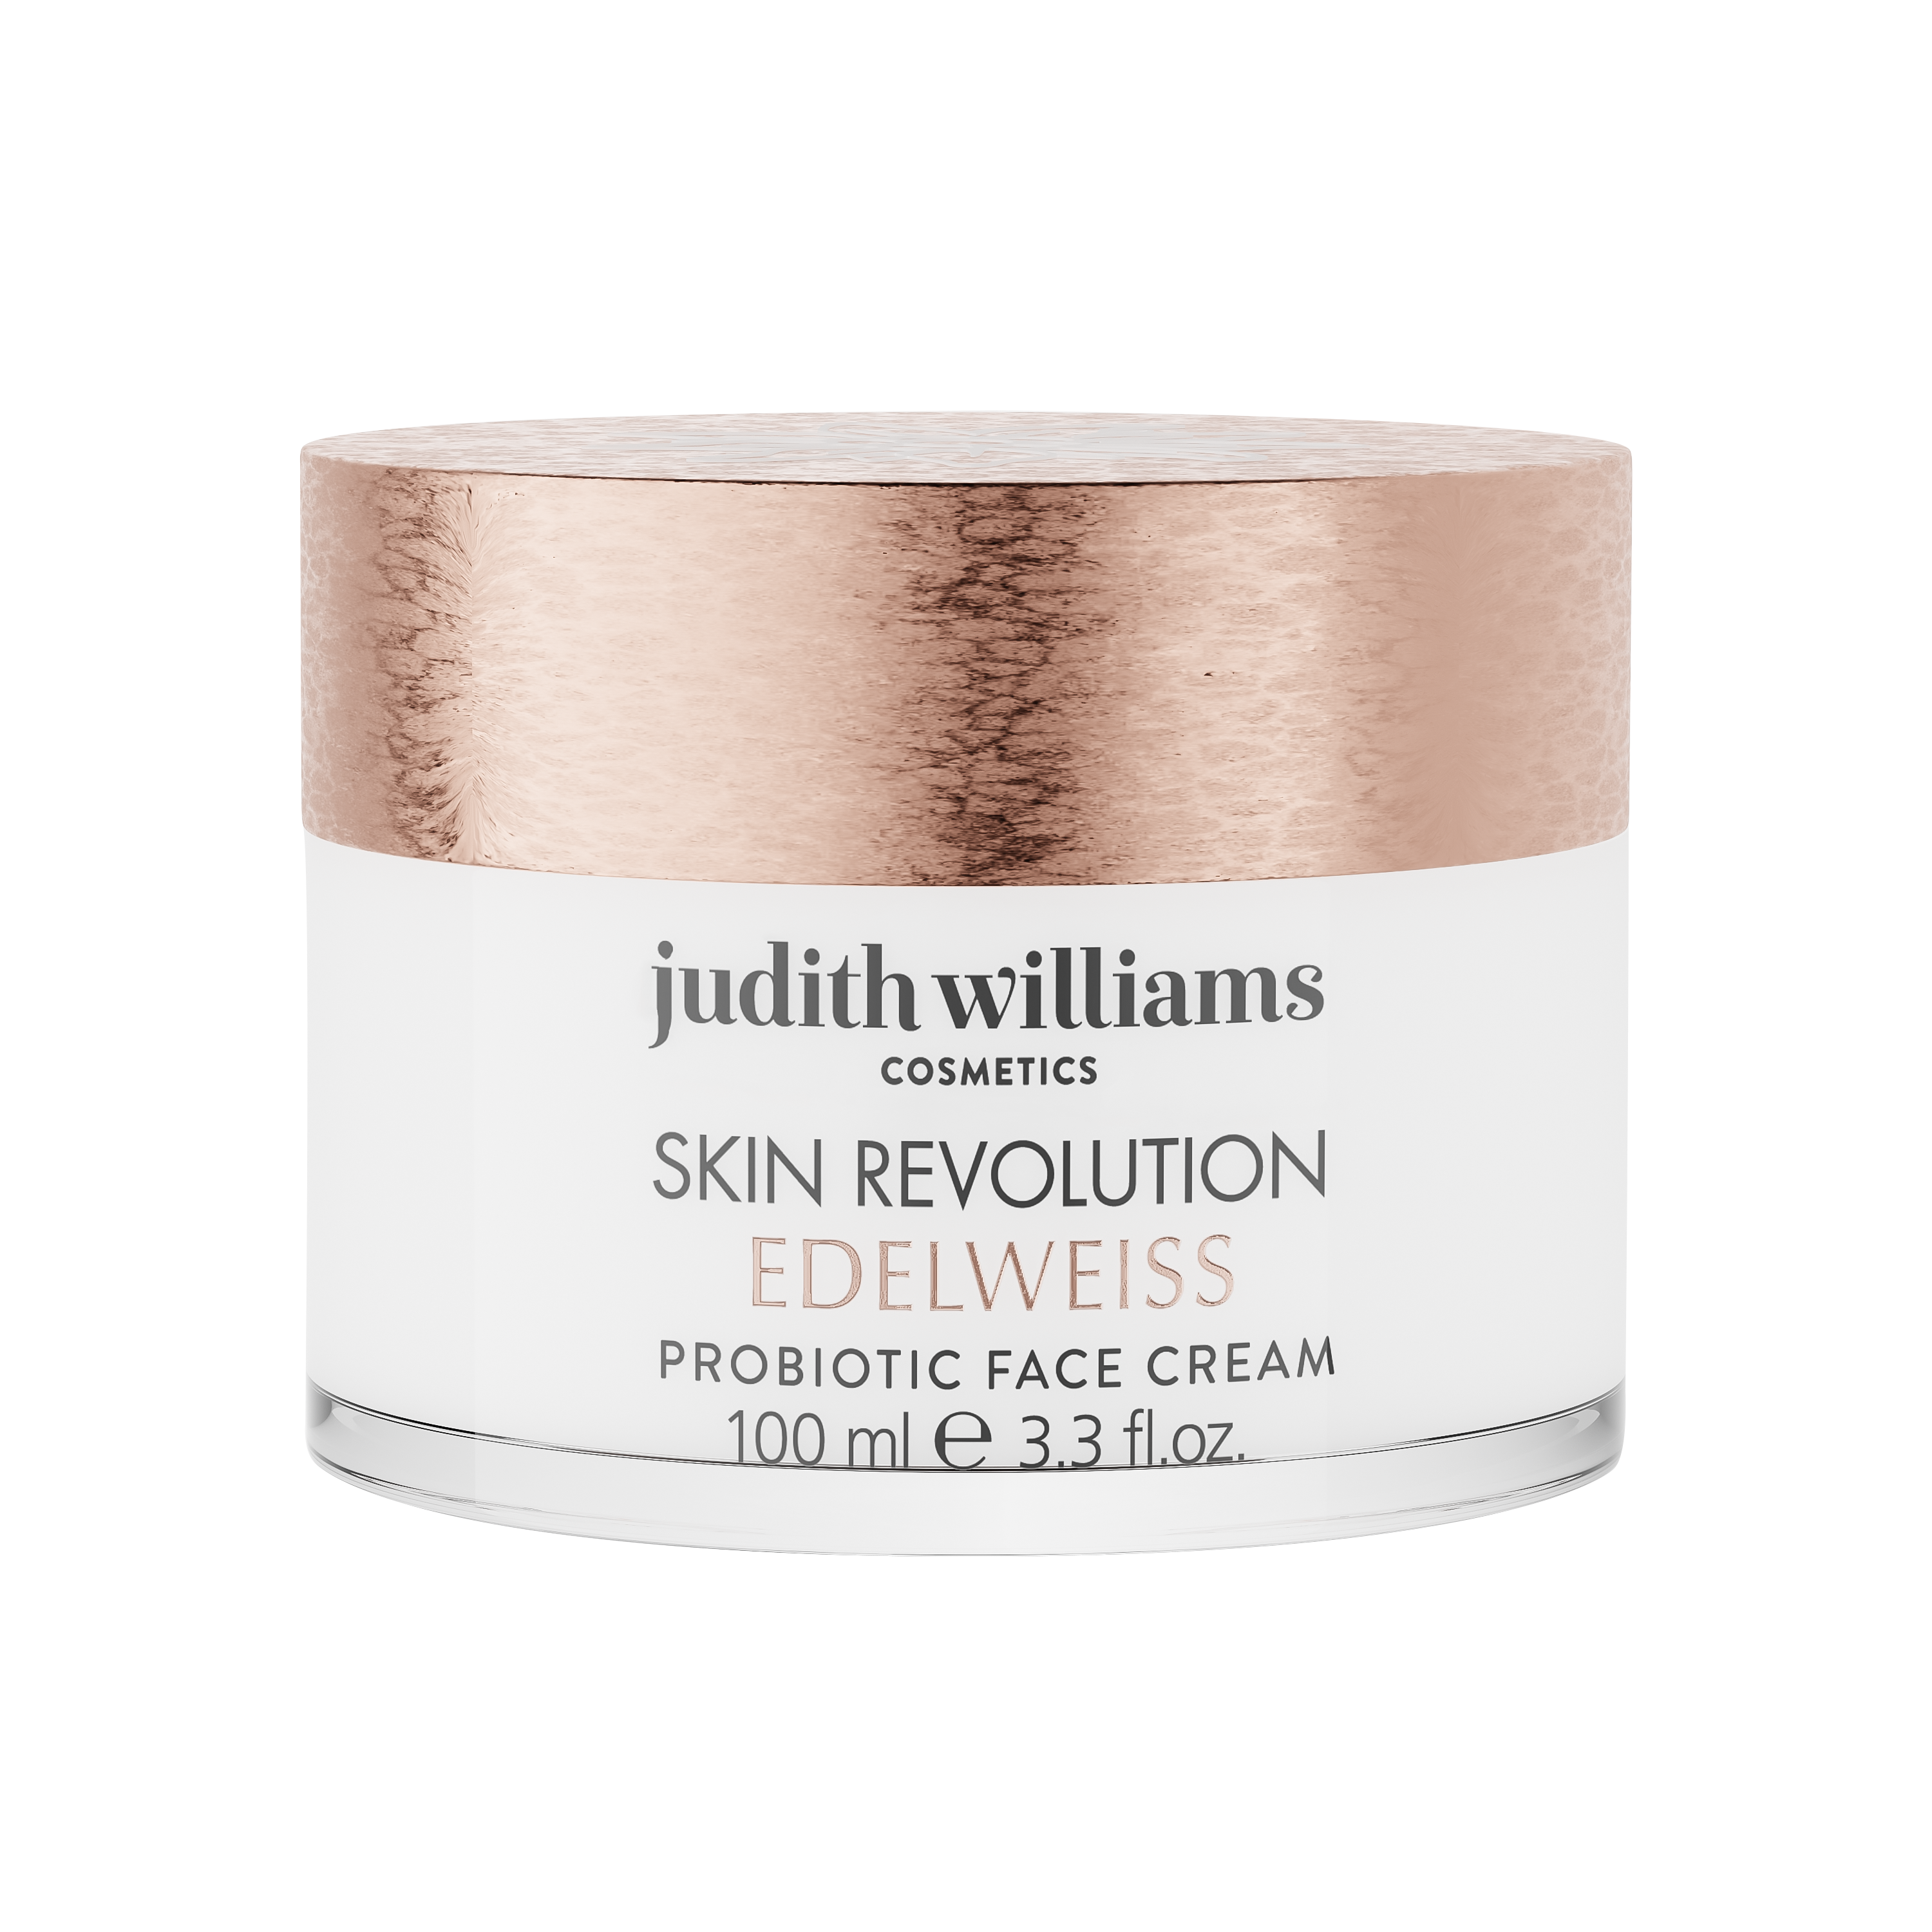 Tagescreme | Skin Revolution Edelweiss | Probiotic Face Cream | Judith Williams